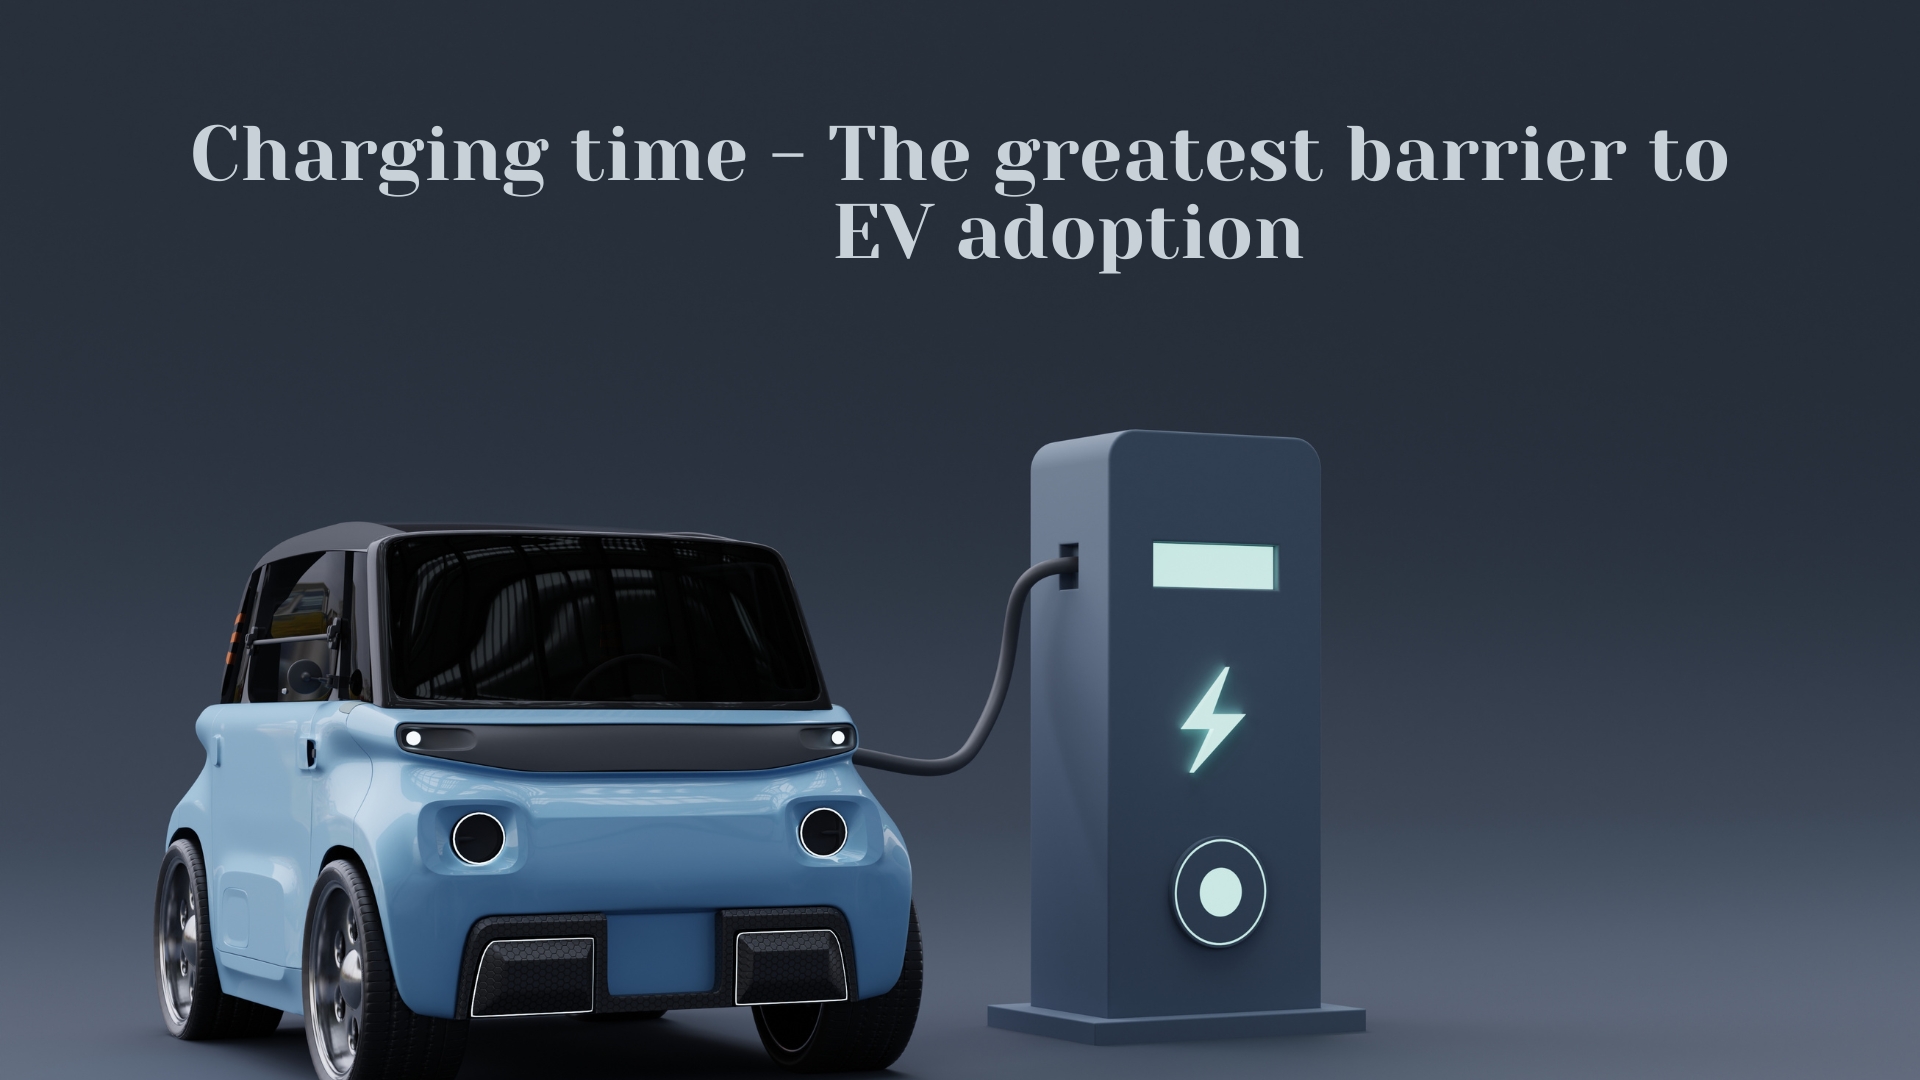 How can an electric vehicle charging time be reduced?